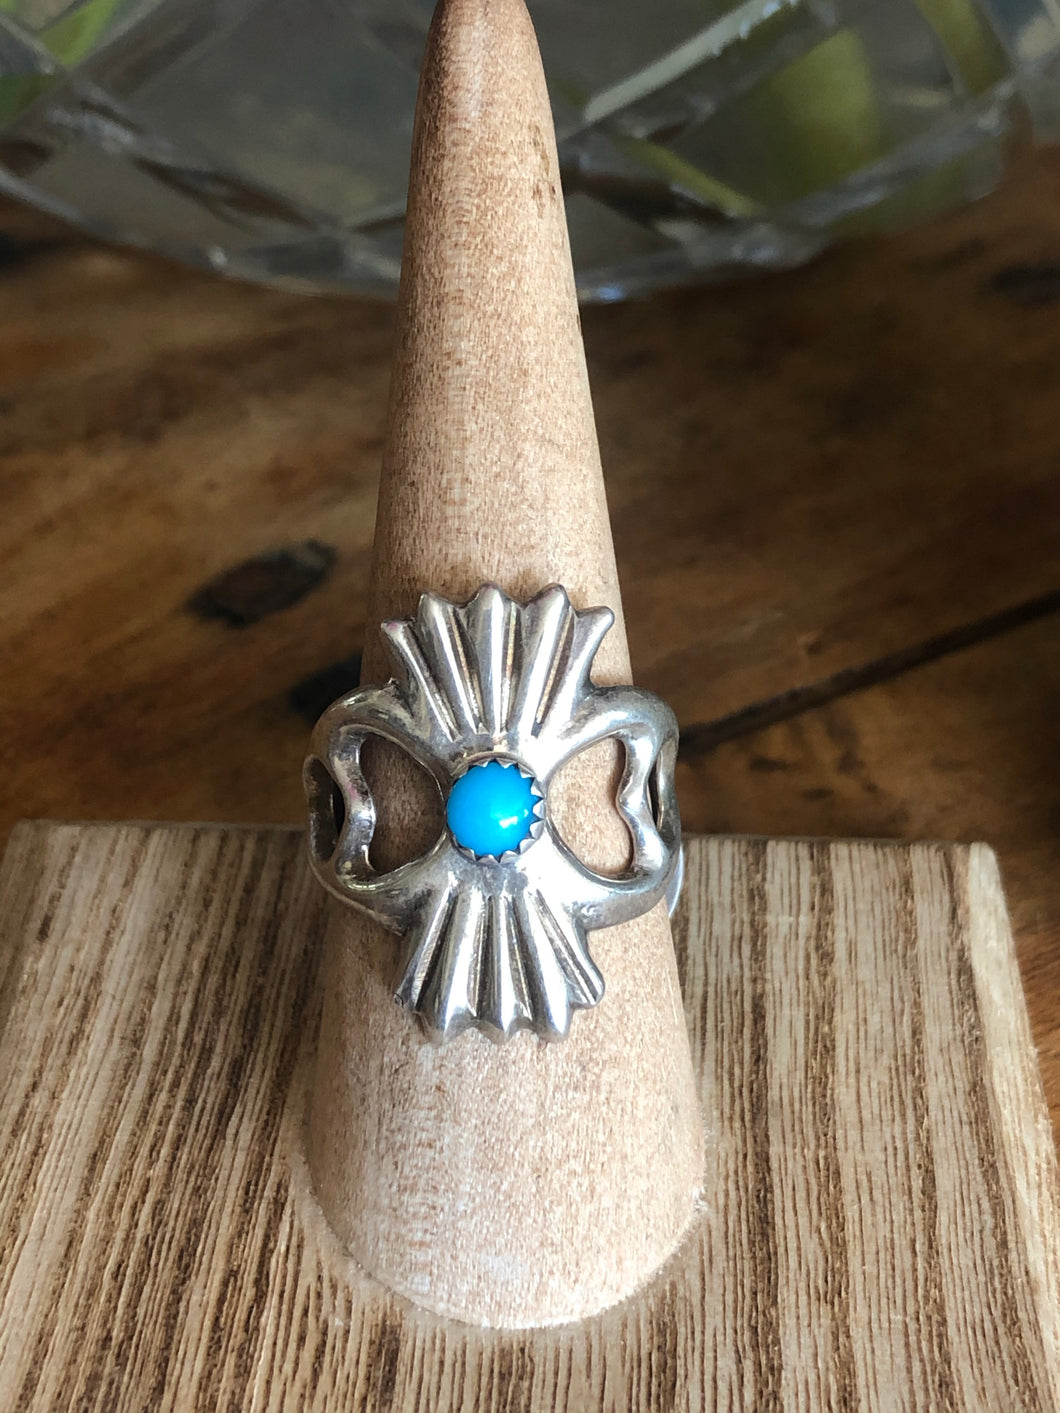 Sandcast Turquoise Ring